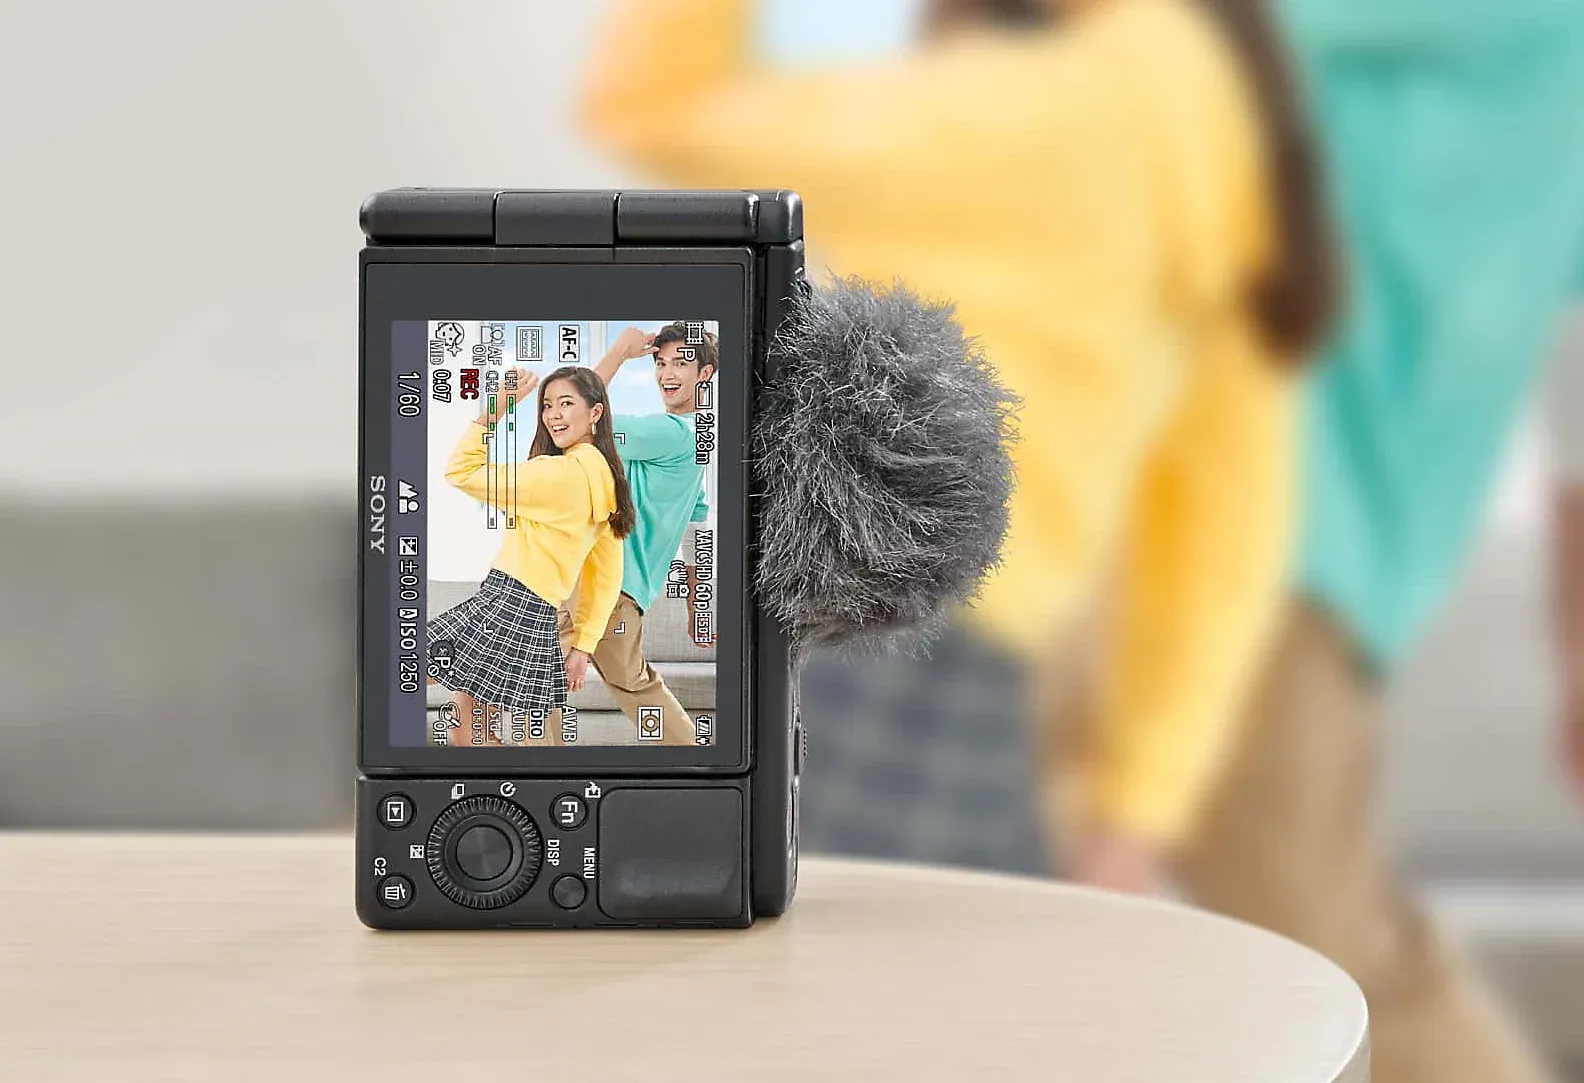 Sony ZV-1 vlogging camera capturing a woman in yellow